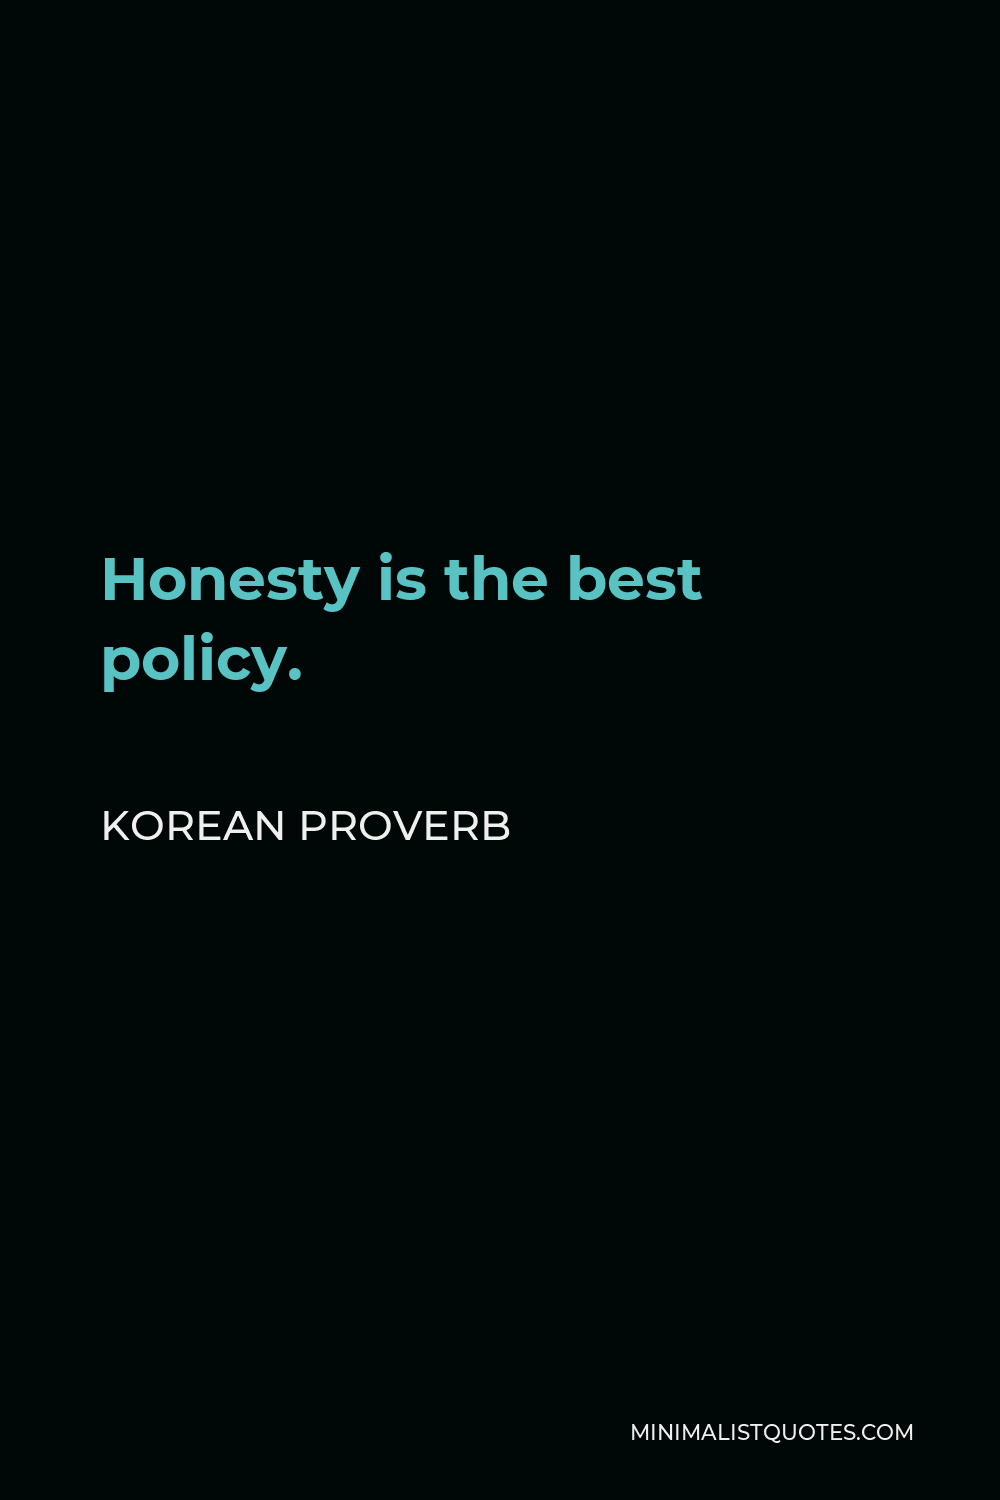 Korean Proverb Quote - Honesty is the best policy.